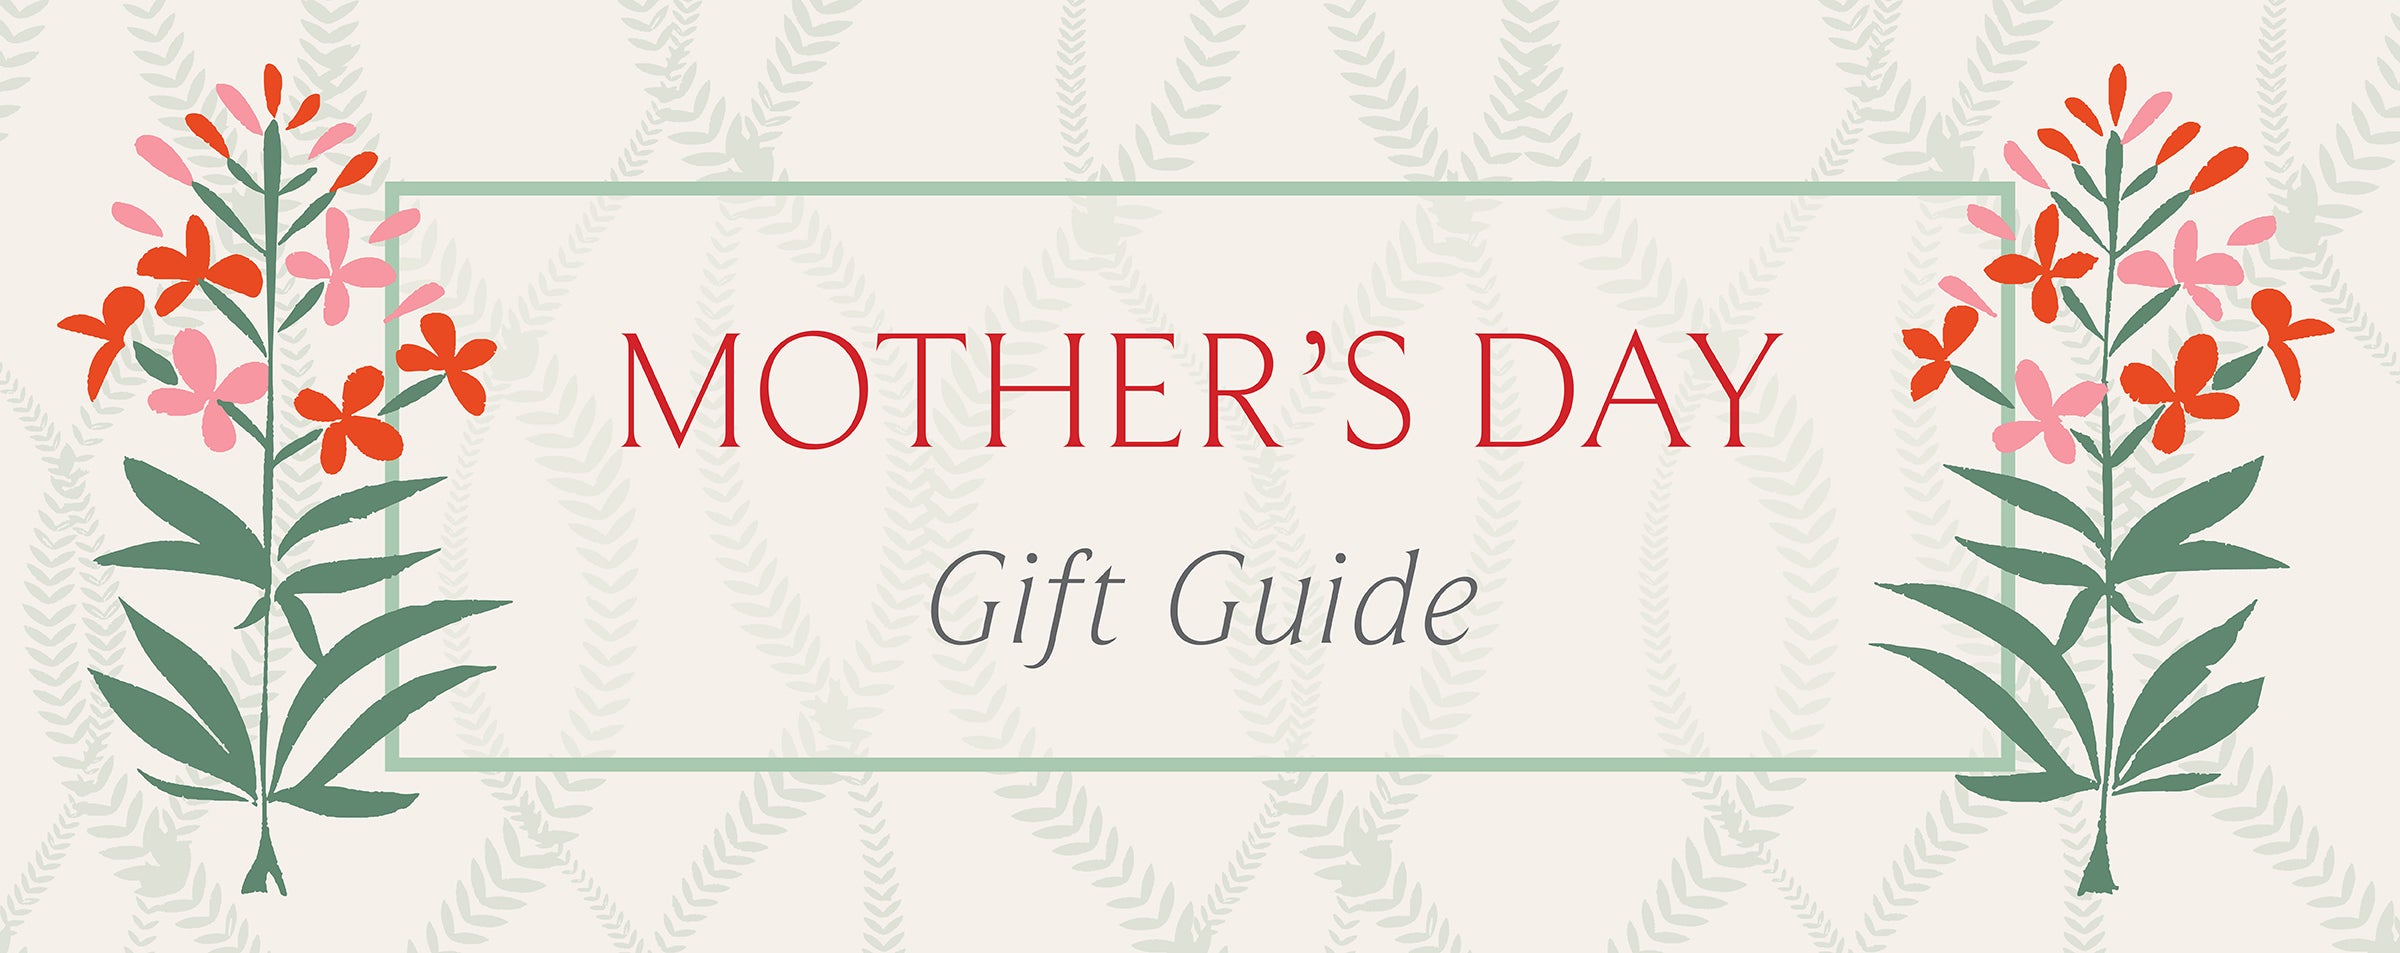 The Perfect Bag For The Best Mom This Mother's Day